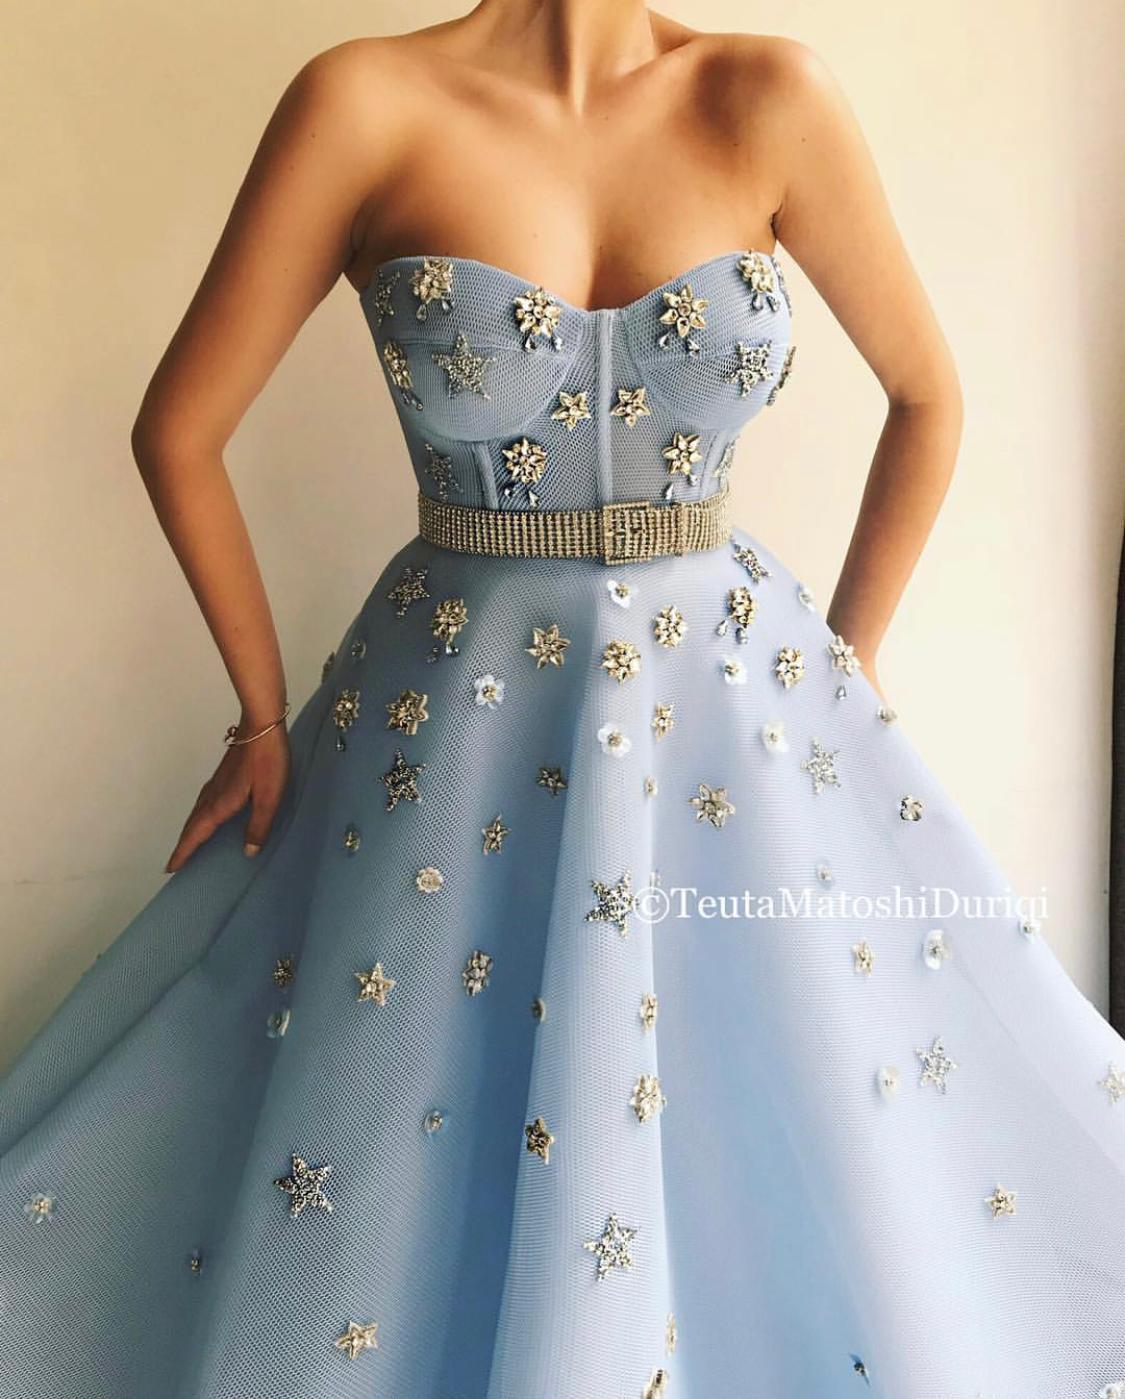 Blue A-Line dress with no sleeves, belt and starry fabric